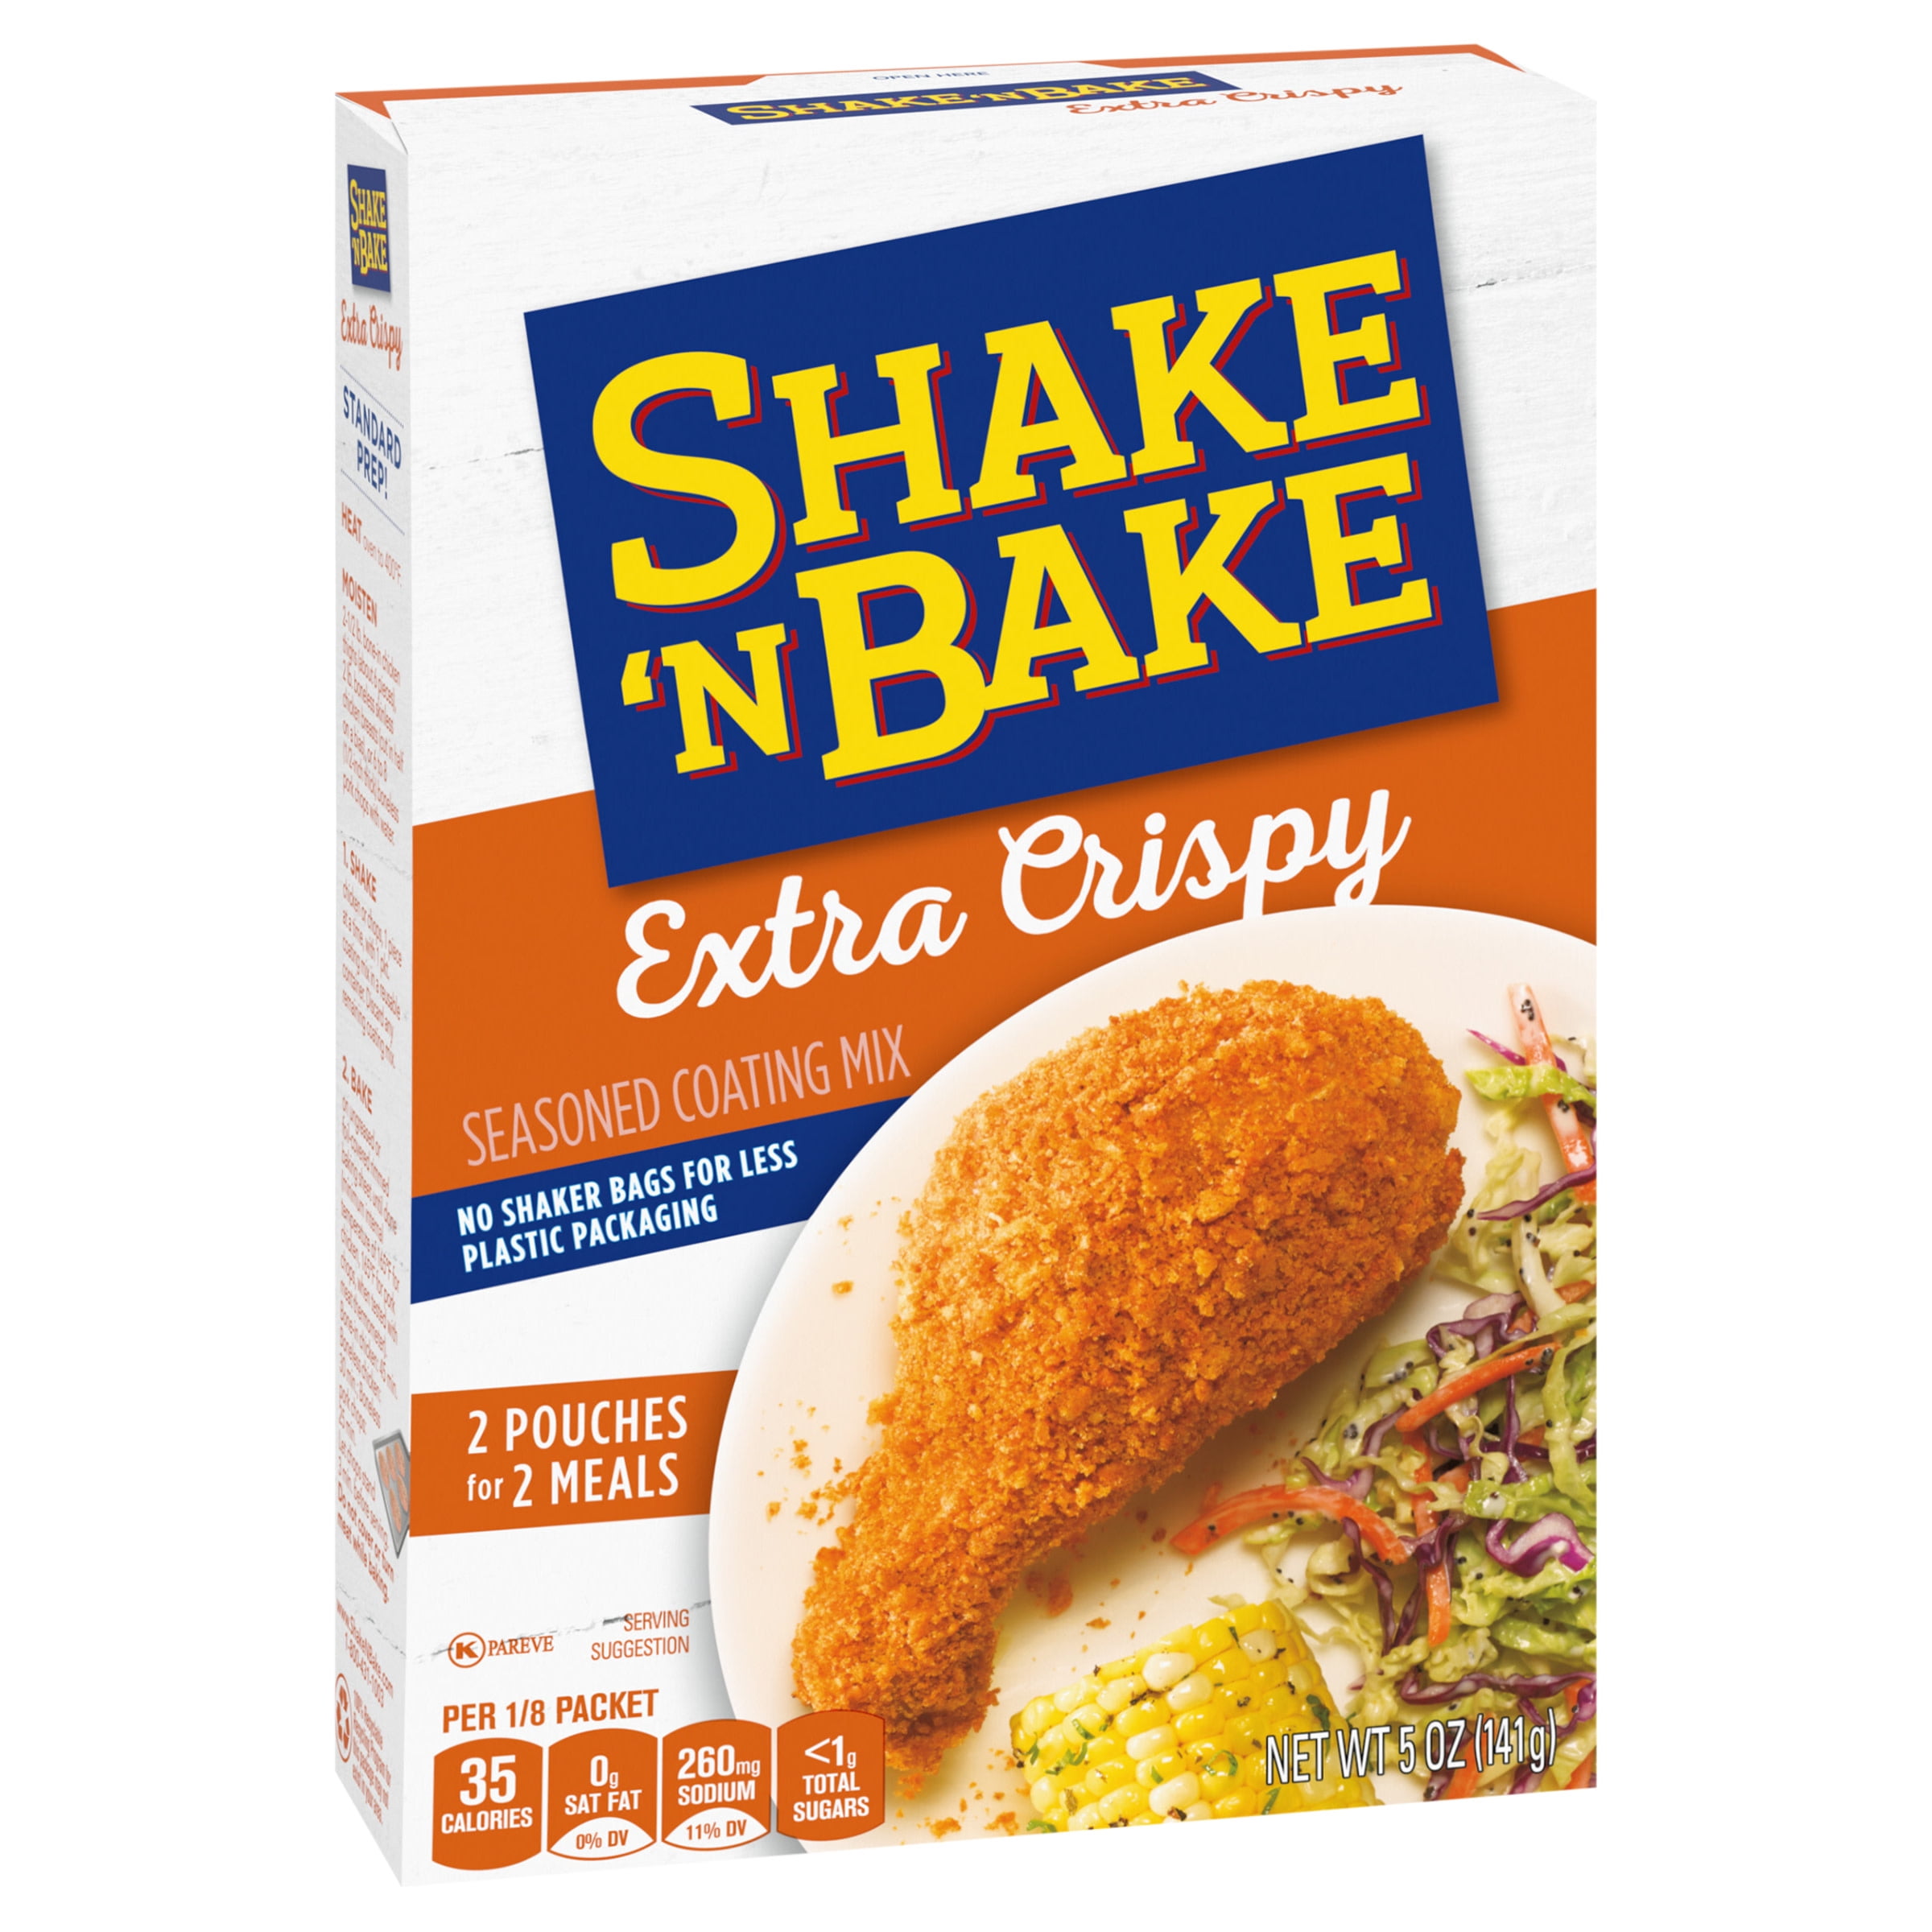 Kemach Crispy Bake Seasoned Coating Mix With Shaker Bag, 2.75 Oz -  : Online Kosher Grocery Shopping and Delivery Service in  New York City